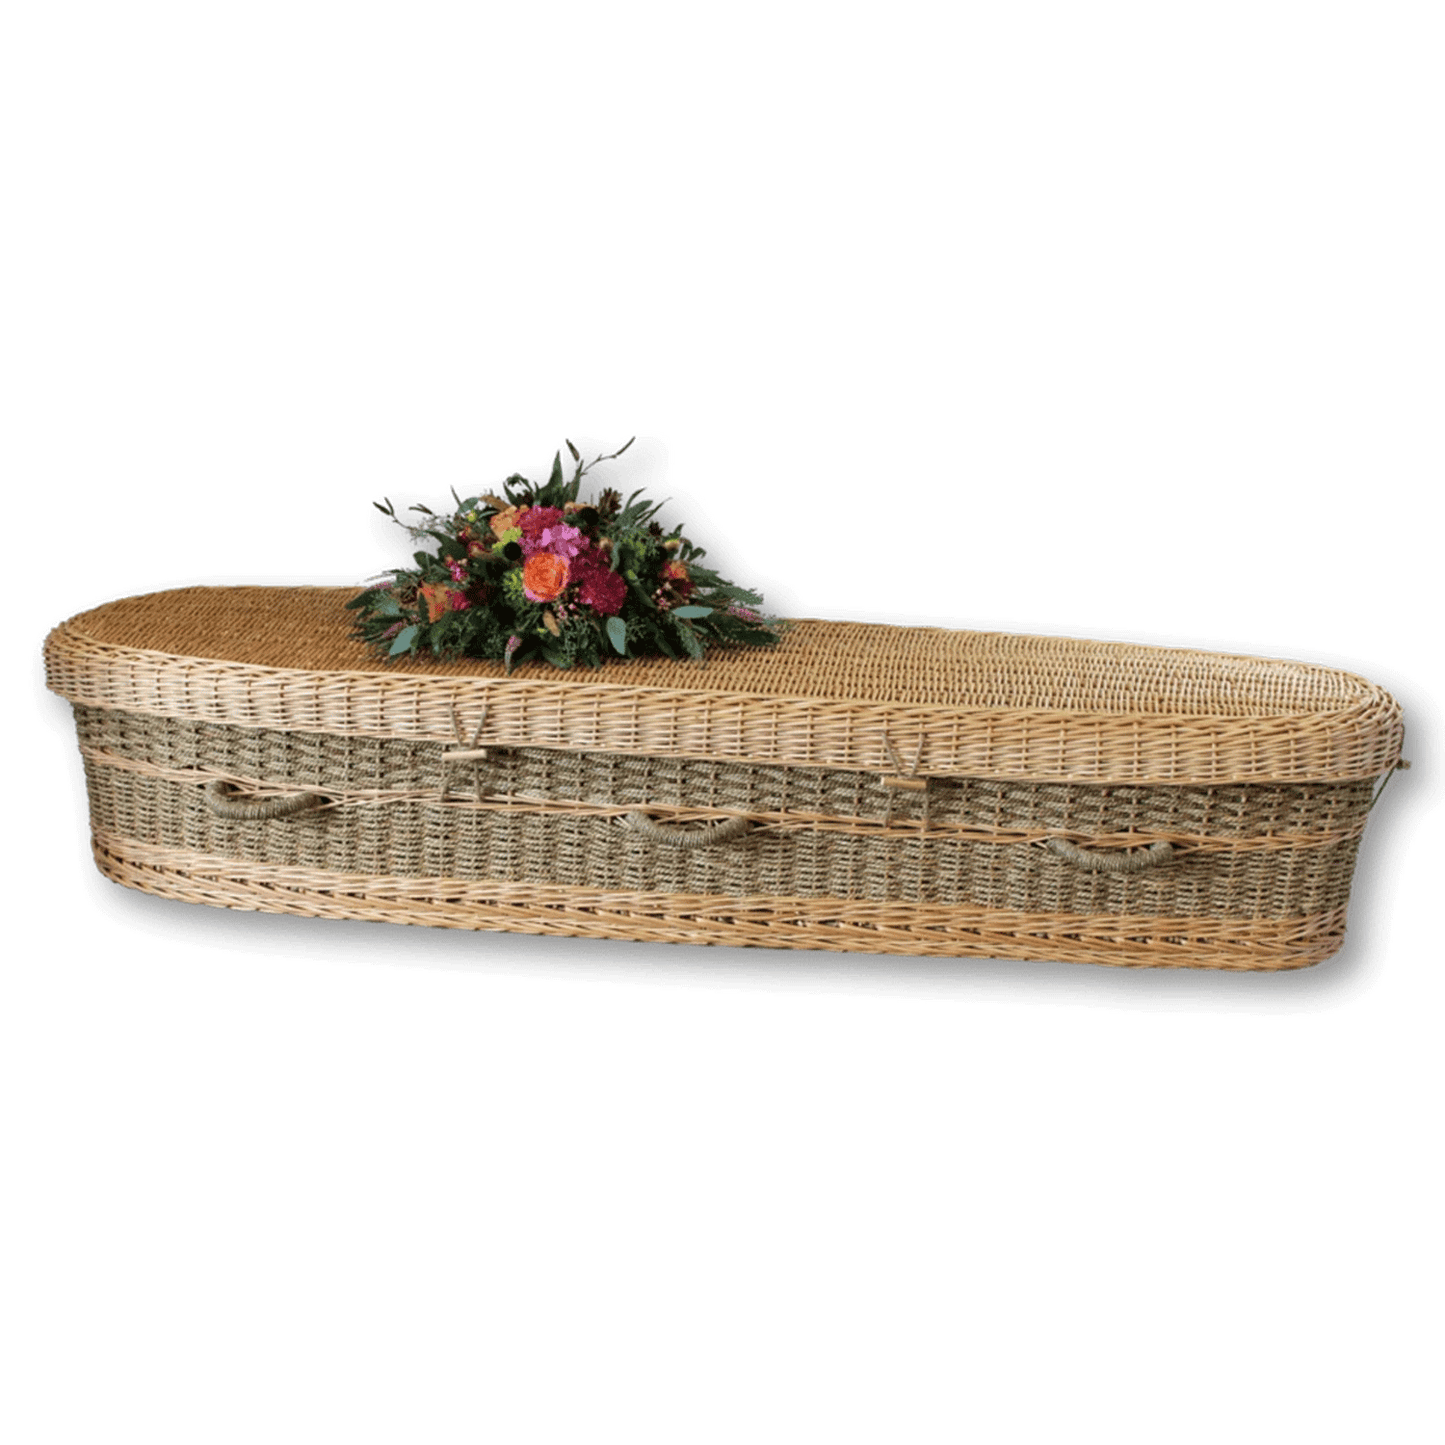 Titan Seagrass | Wicker Casket made from Willow with Seagrass - Titan Casket